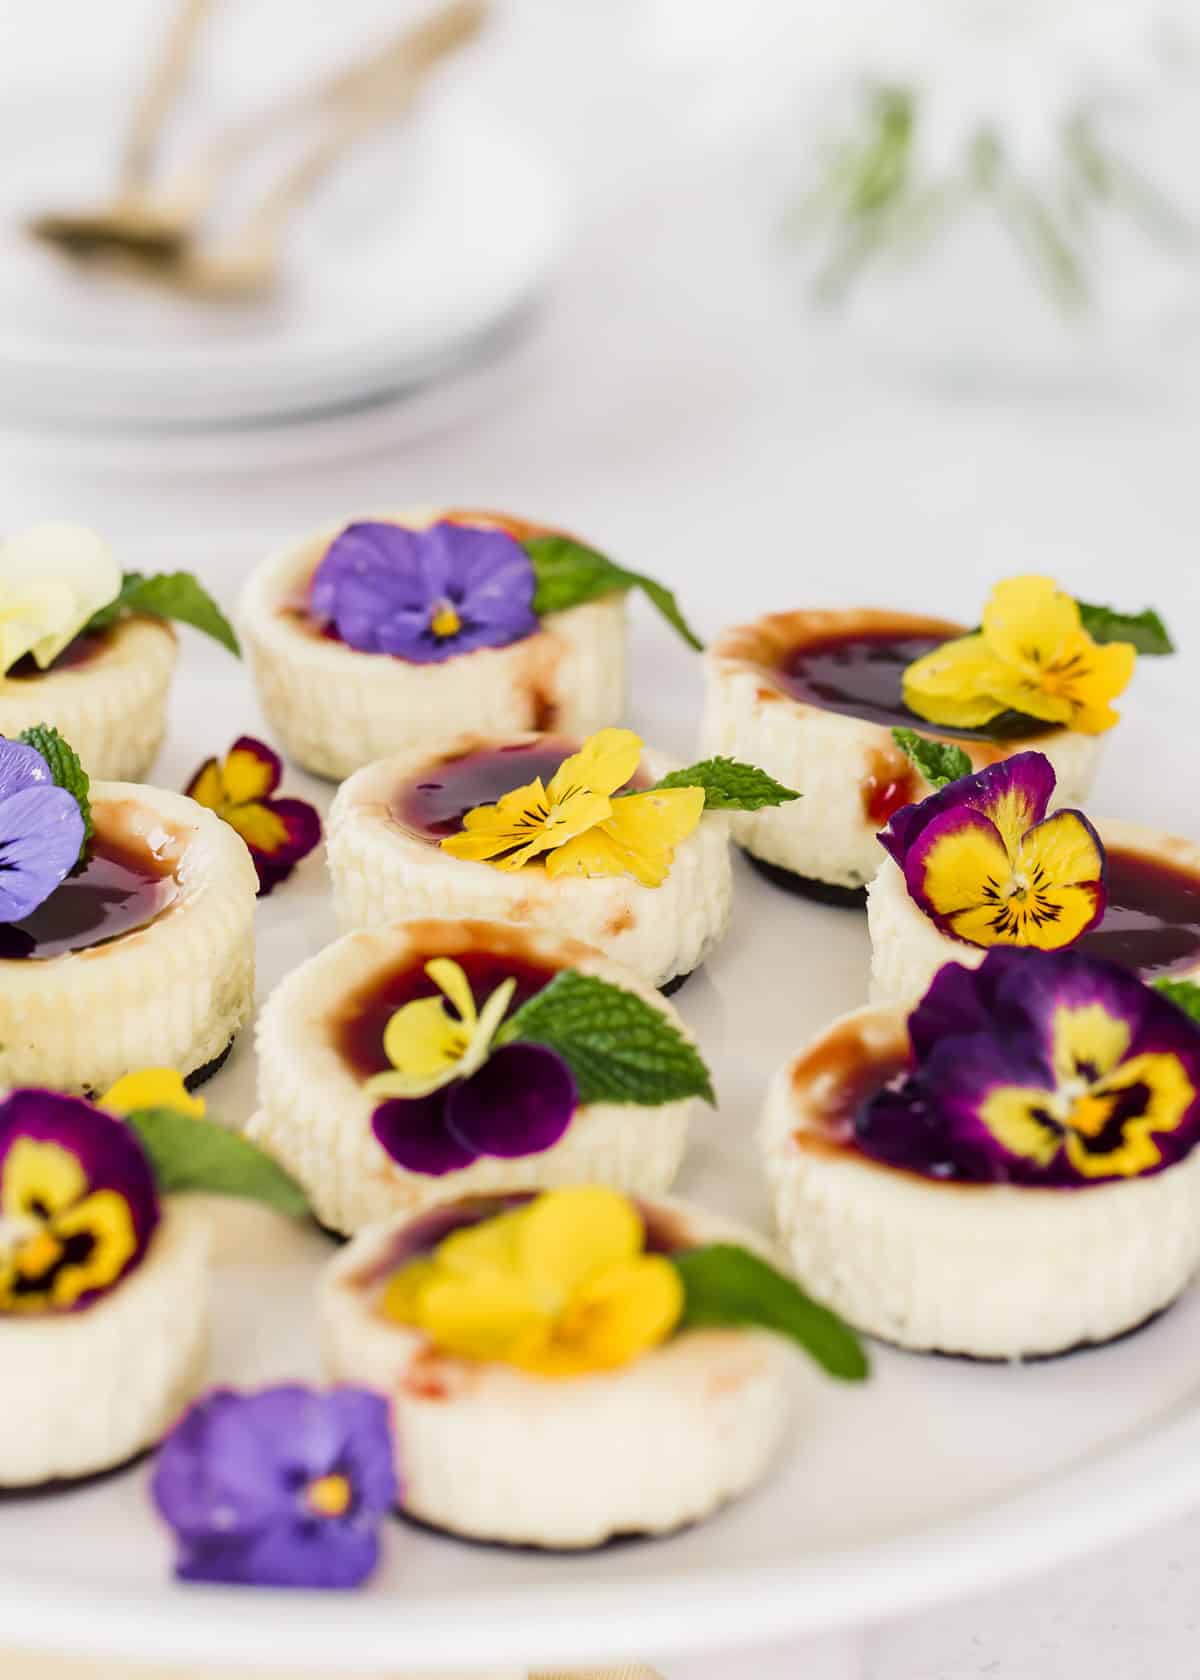 mini cheesecakes on white platter garnished with yellow and purple flowers.